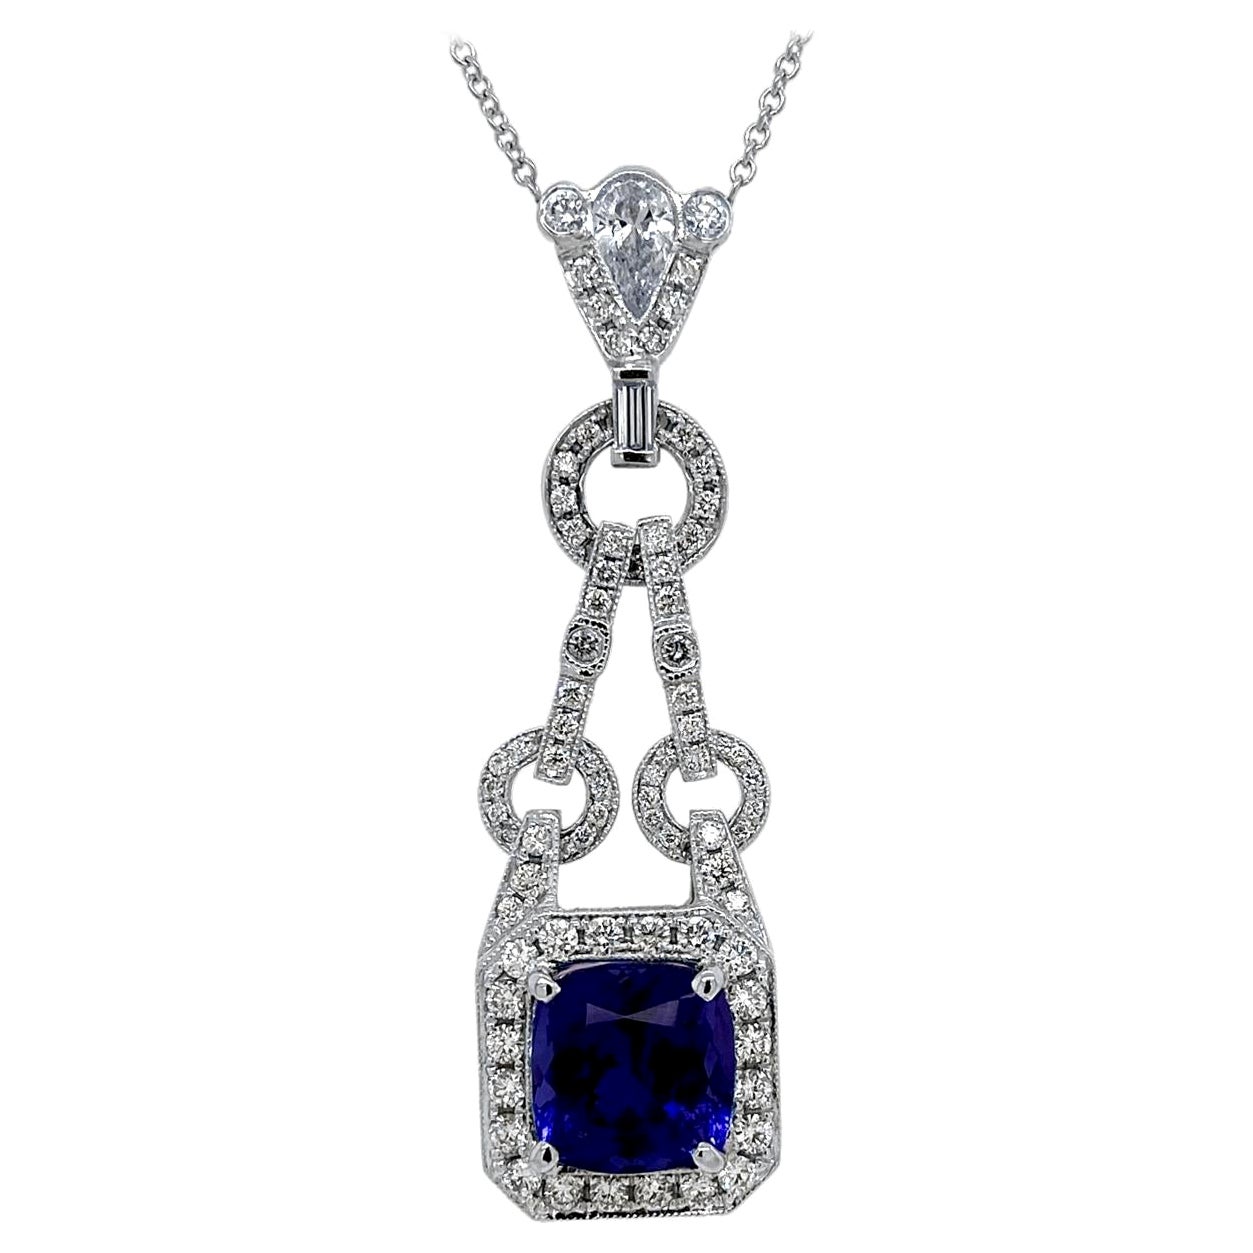 5.62 Carat Cushion Shape Tanzanite Necklace with 1.40 Carat Diamonds on the Side